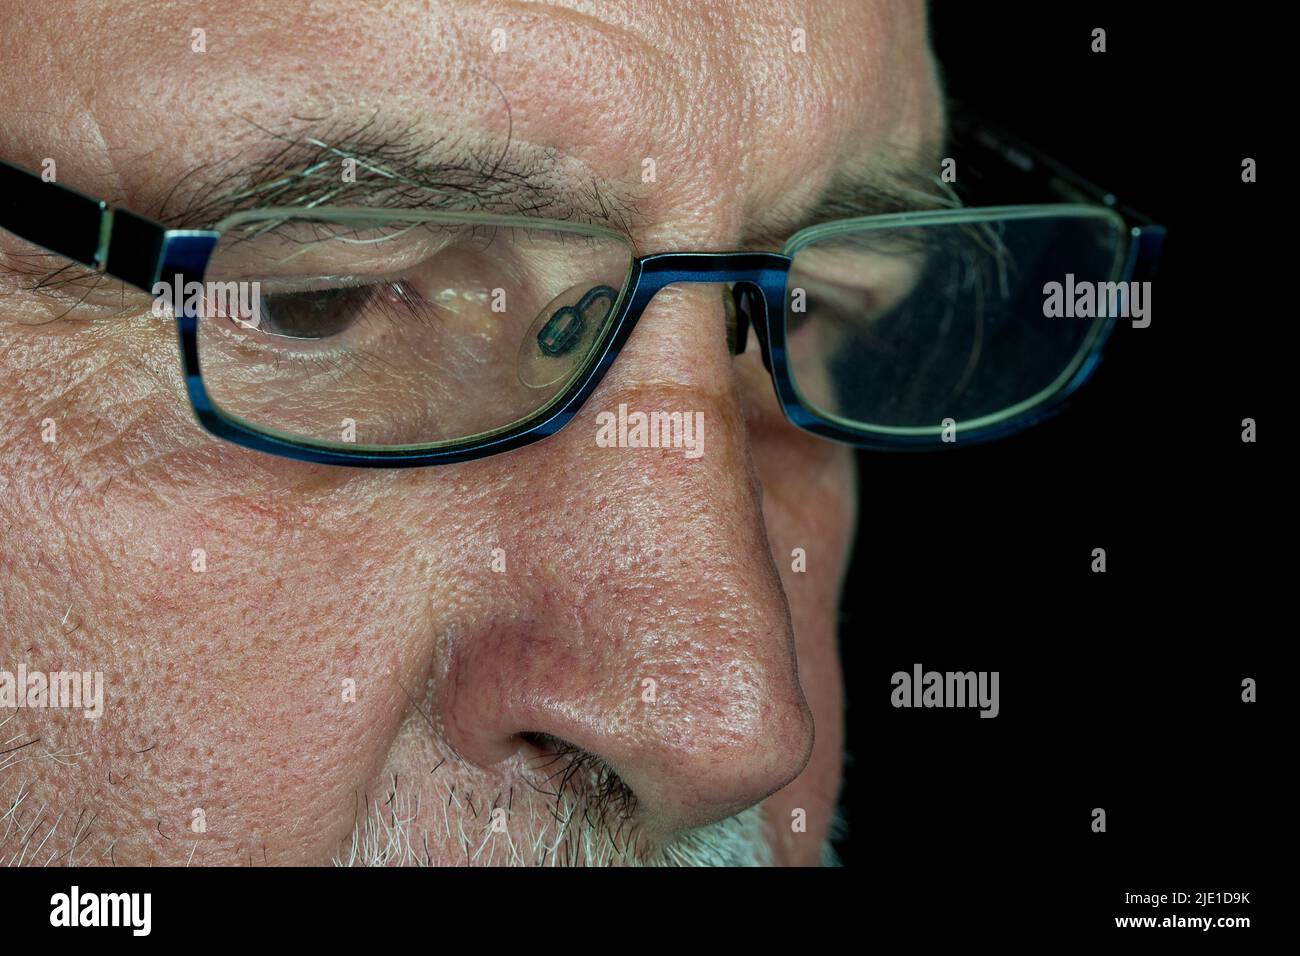 Face detail of an old man with glasses. Presbyopia makes reading difficult without glasses in the second half of life. Stock Photo